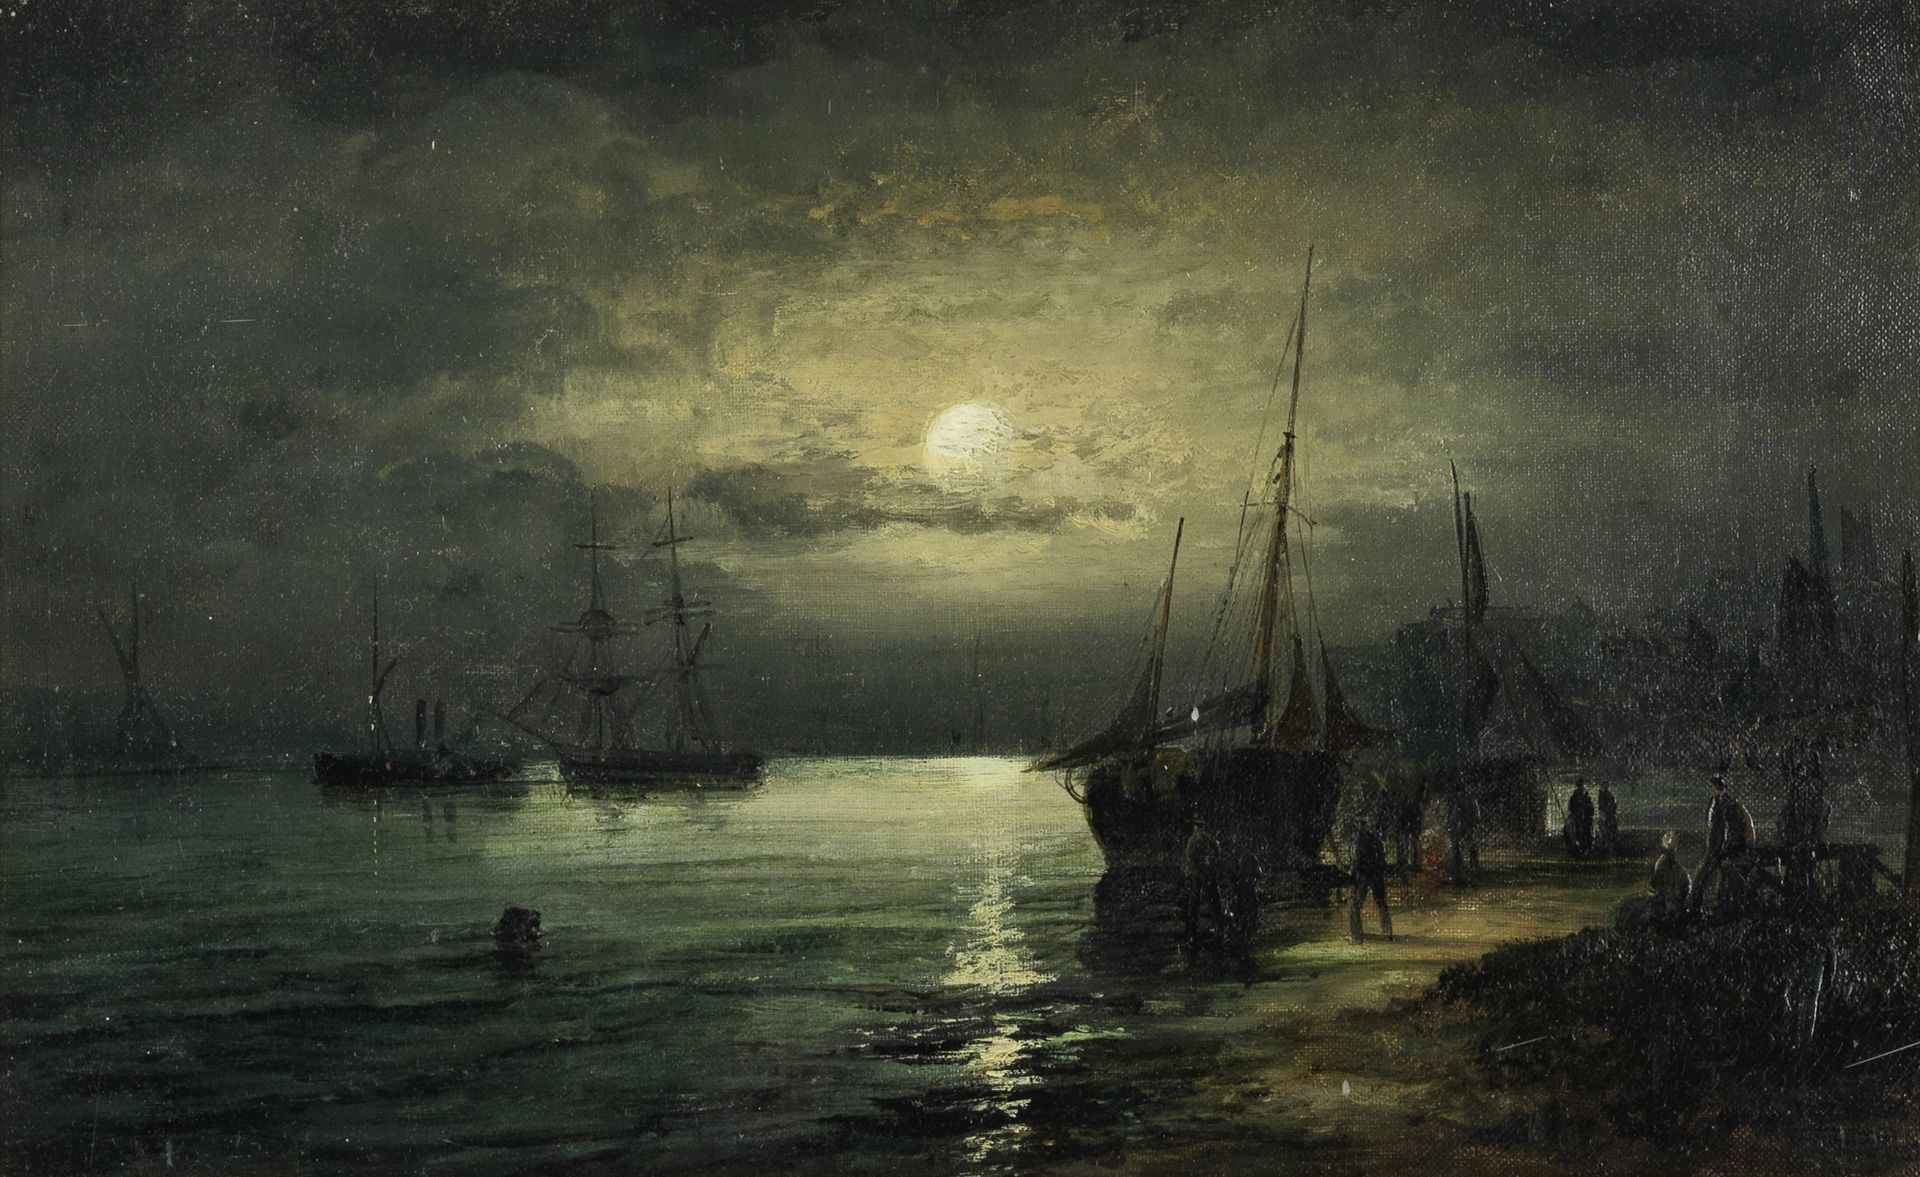 William Anslow Thornbery (British, 1847-1907) alias 'Thornley' Fishing boats by moonlight, Shore...